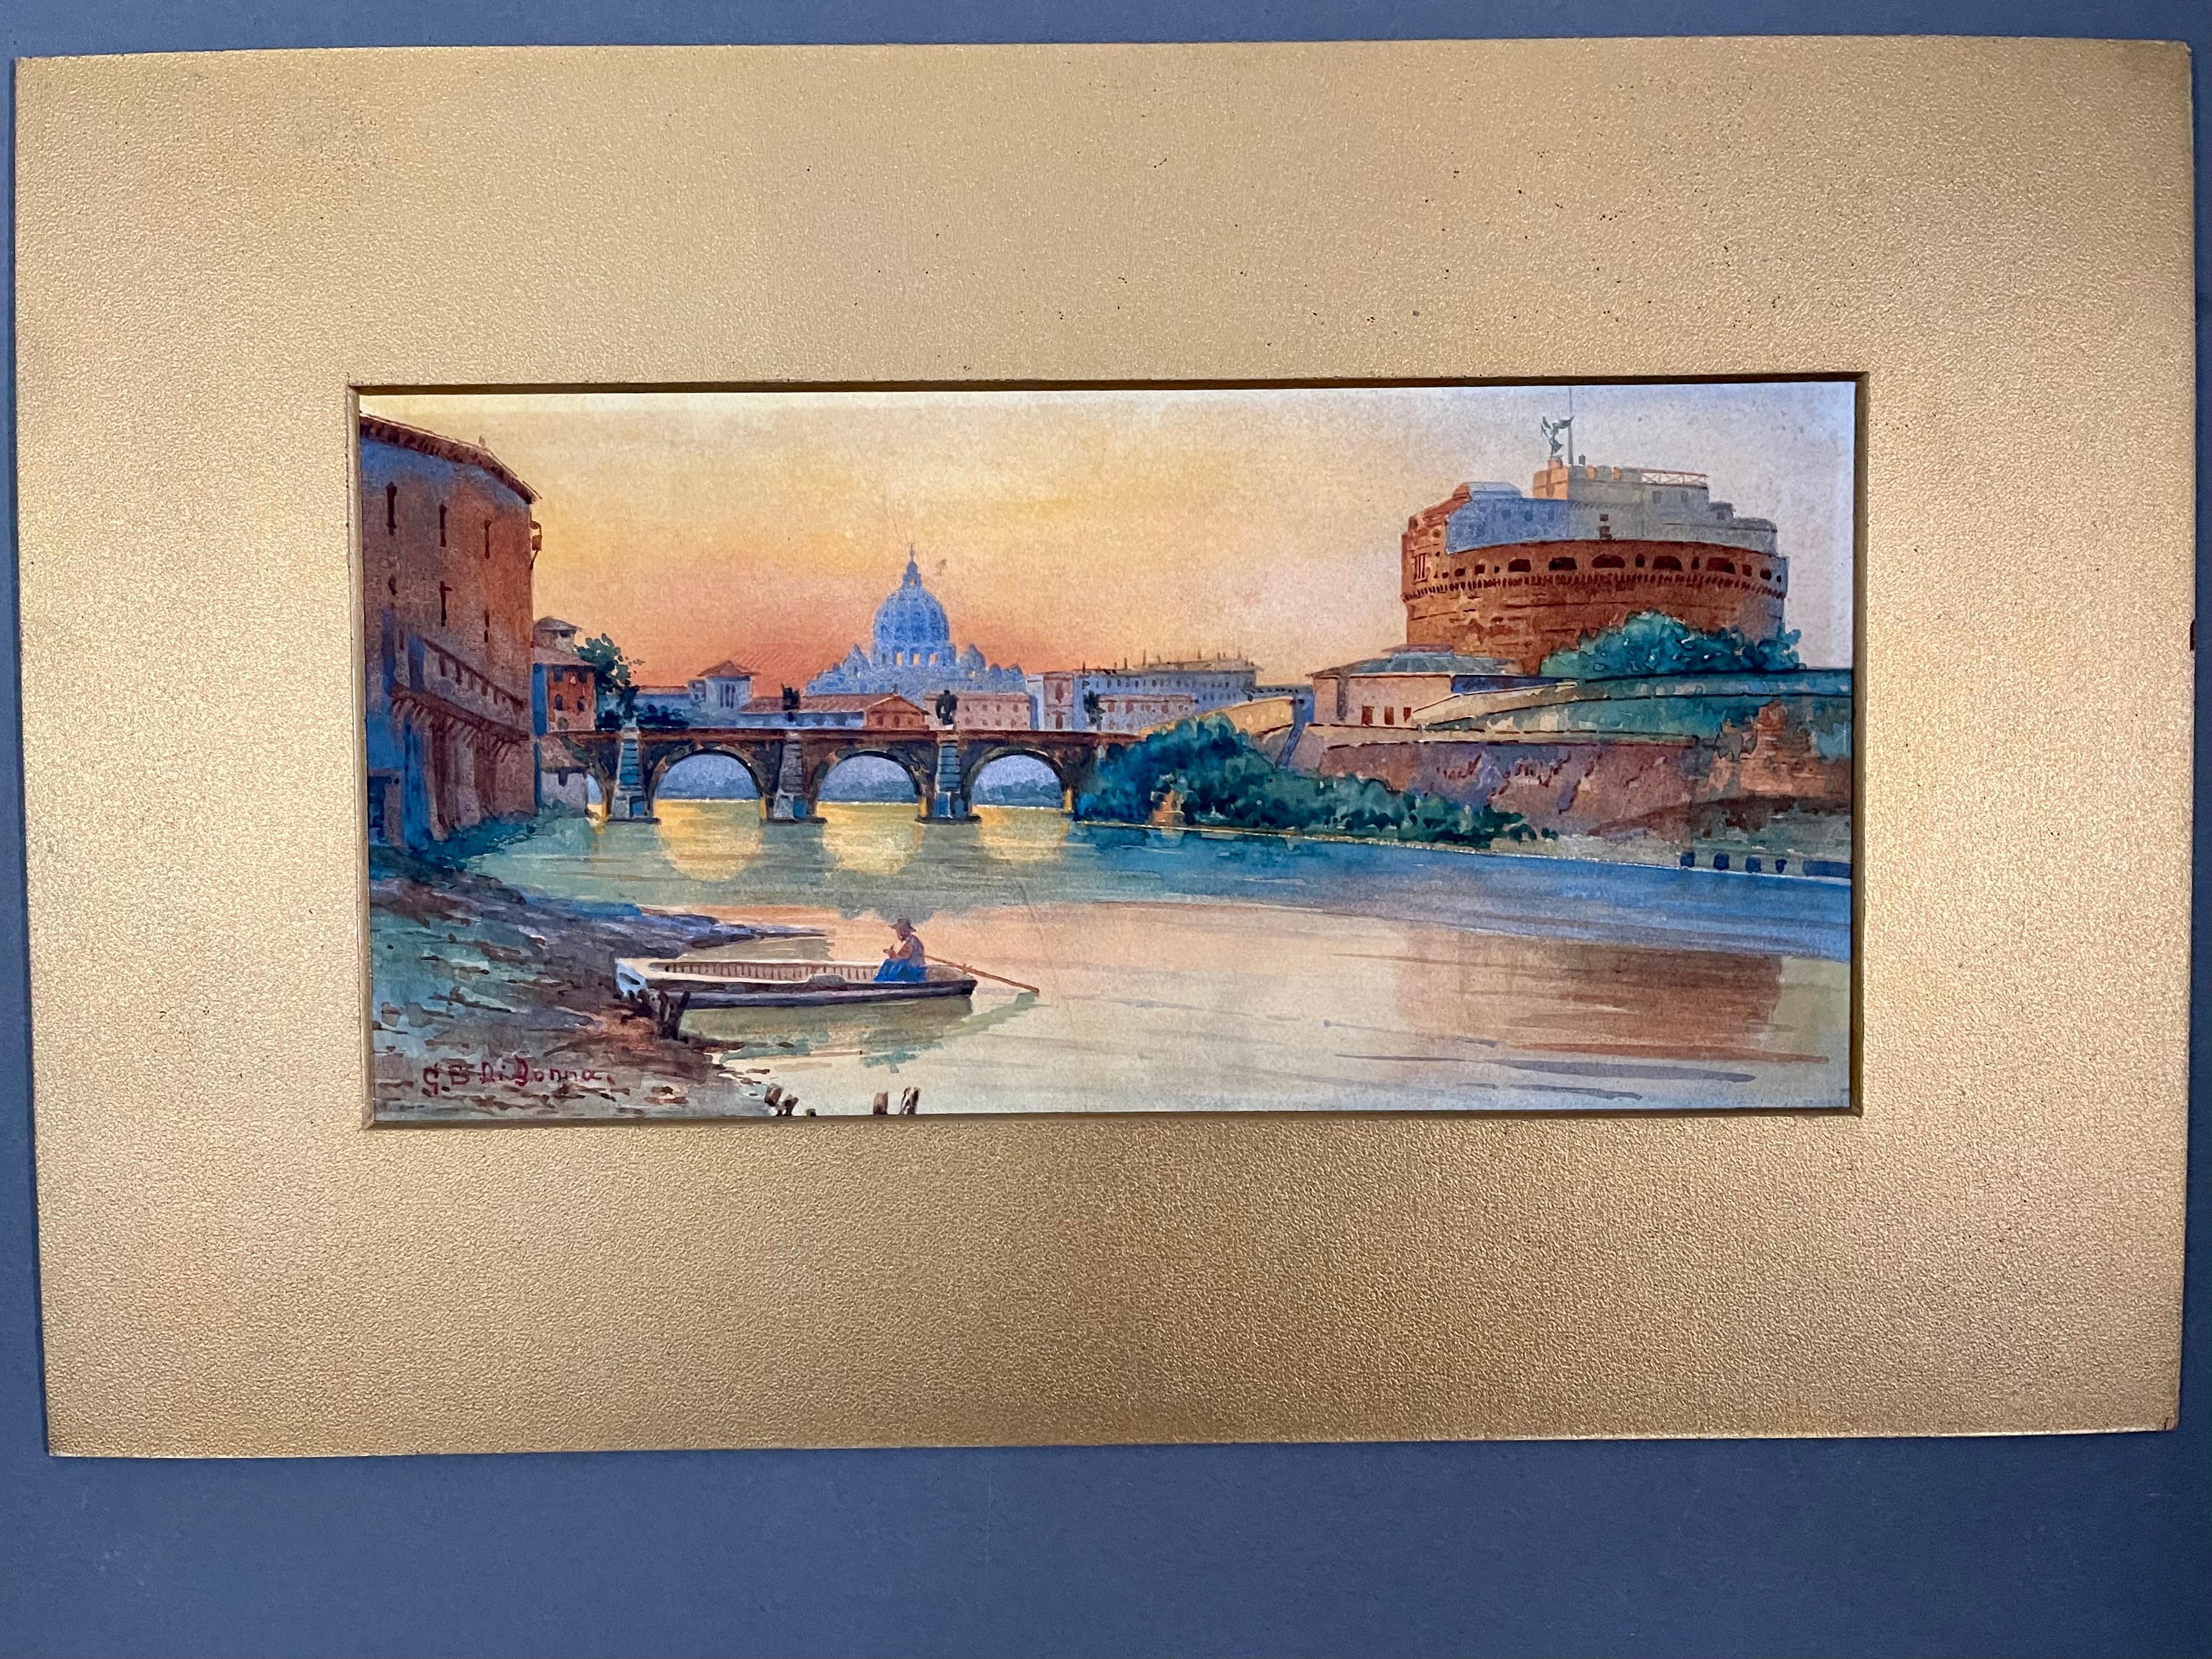 Important watercolor painting representing a beautiful view of Rome with the Tiber, Castel Sant'Angelo and the dome of St. Peter's in the background.
A typical work in the vein of the Grand Tour, this is a beautiful painting with very intense